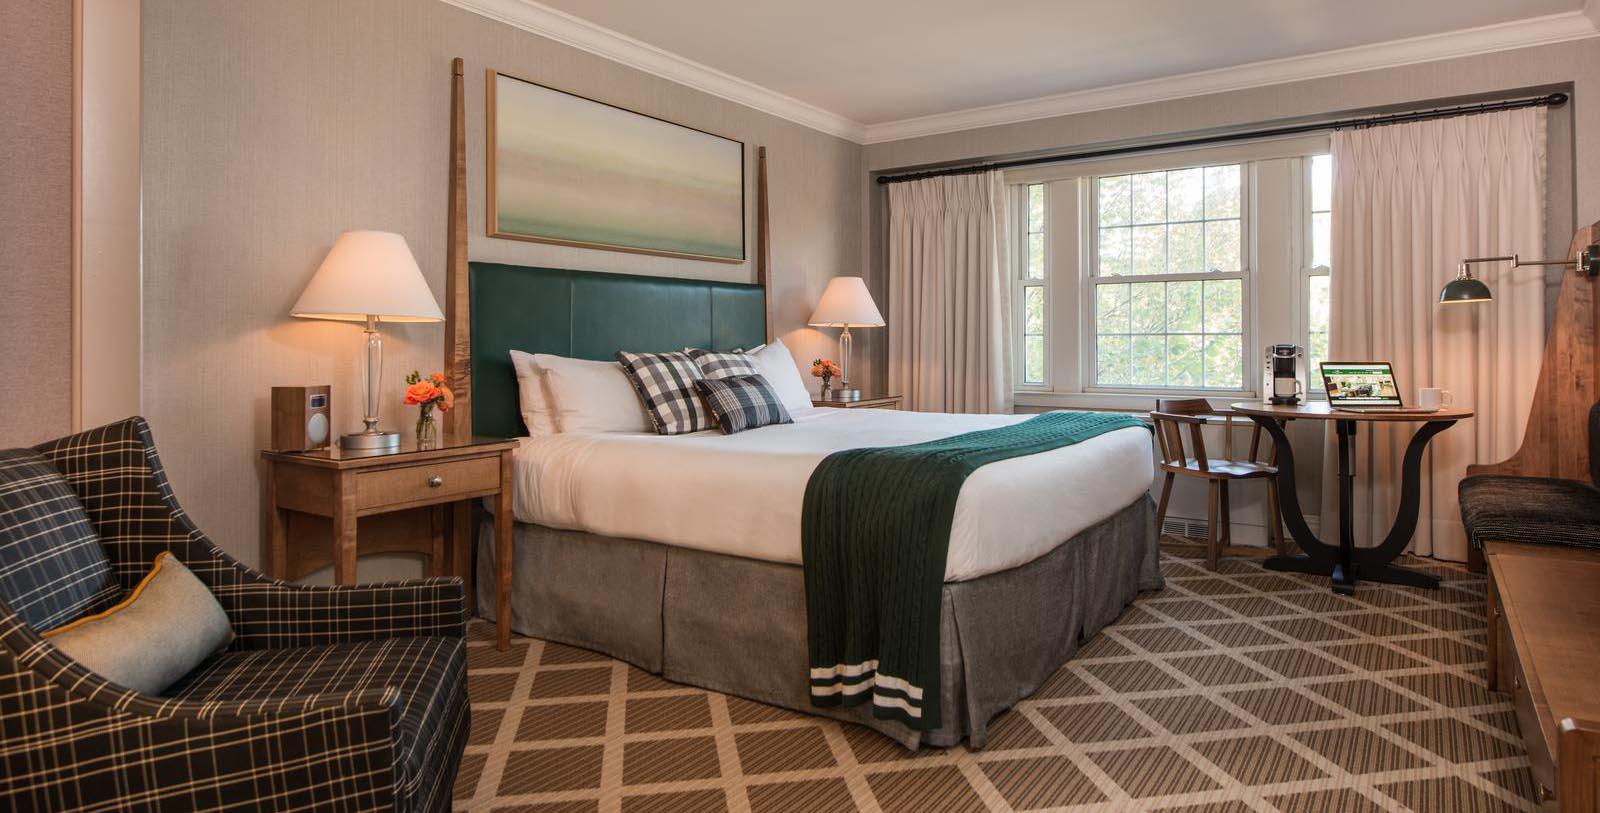 Image of guestroom Hanover Inn Dartmouth, 1780, Member of Historic Hotels of America, in Hanover, New Hampshire, Accommodations